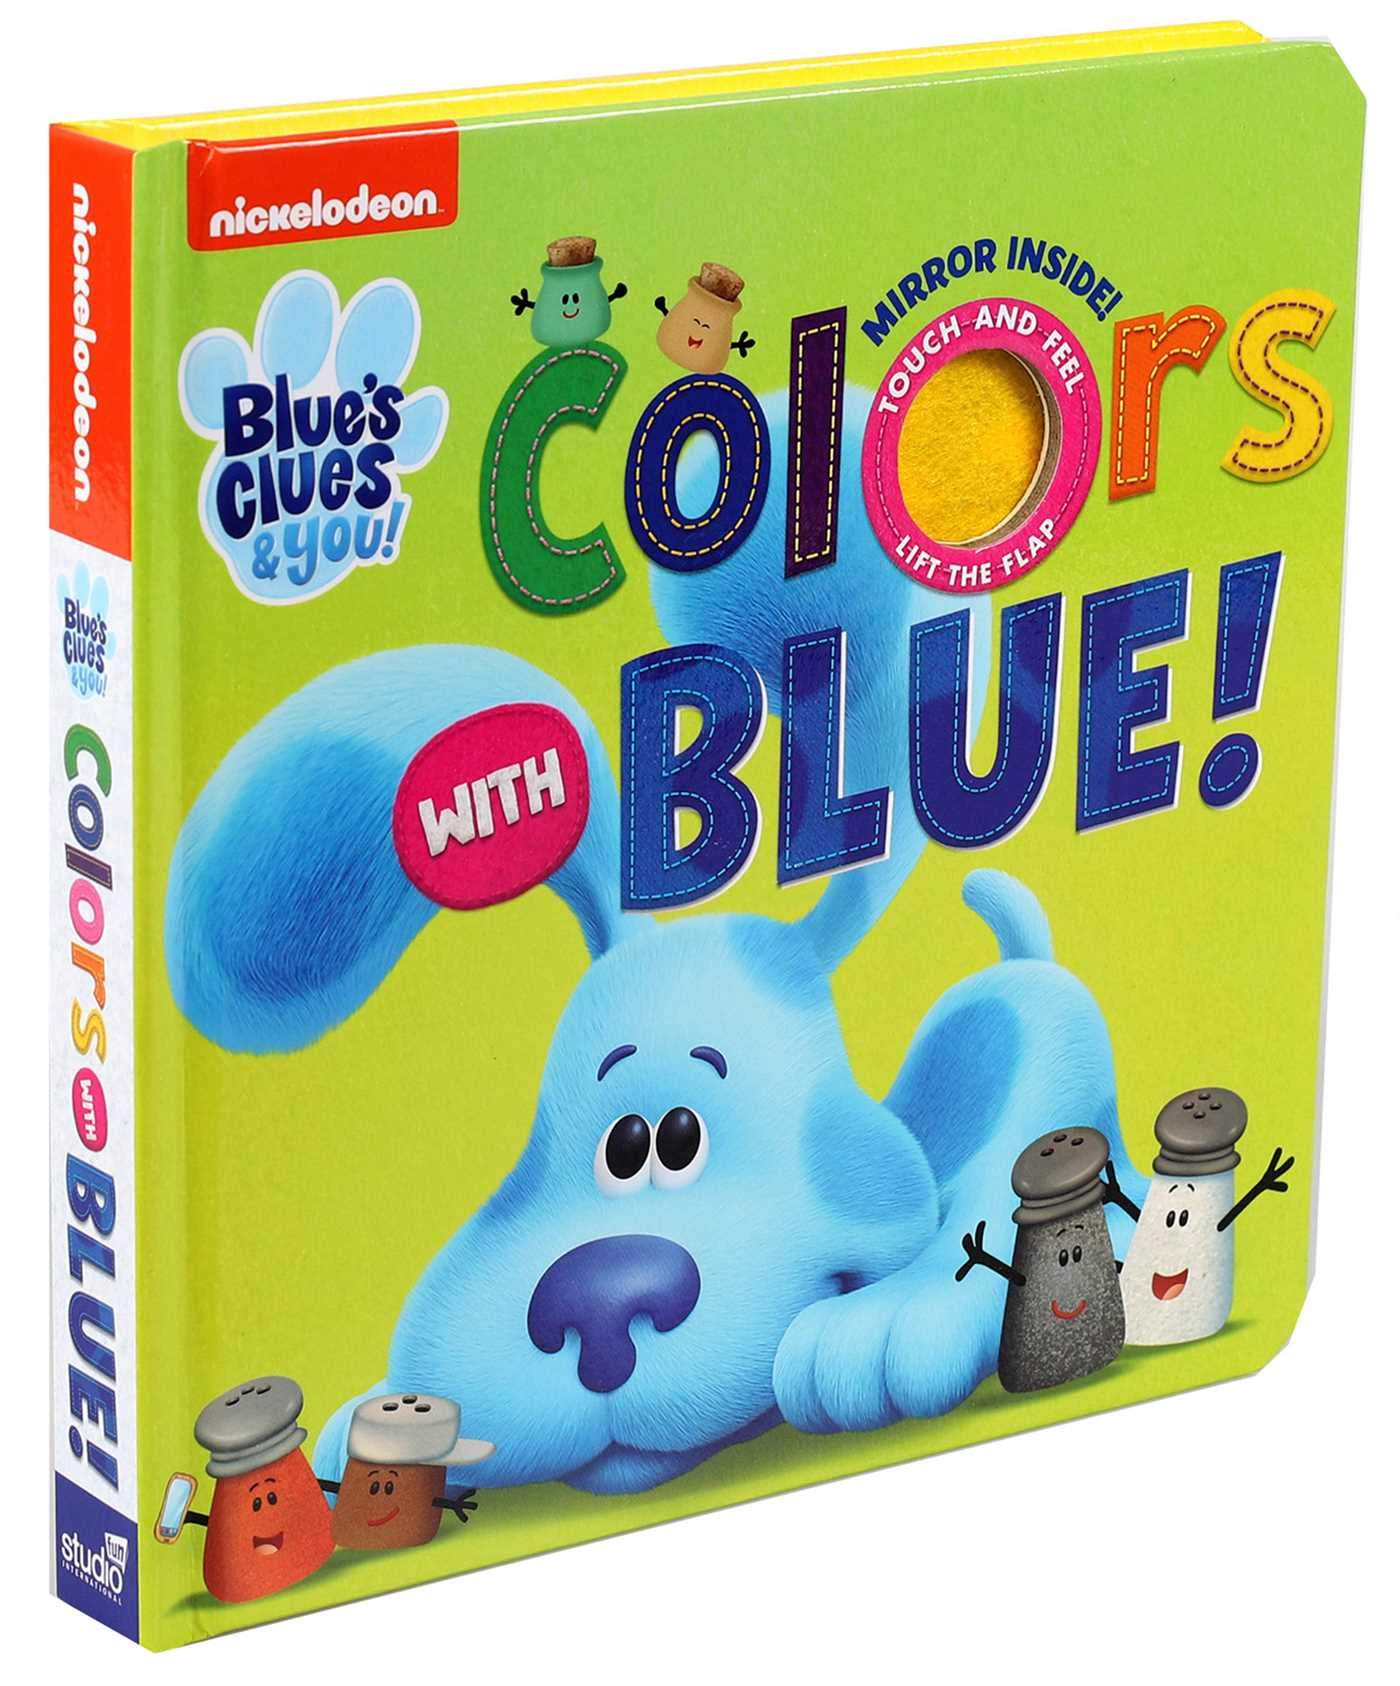 Nickelodeon Blues Clues & You! Colors with Blue